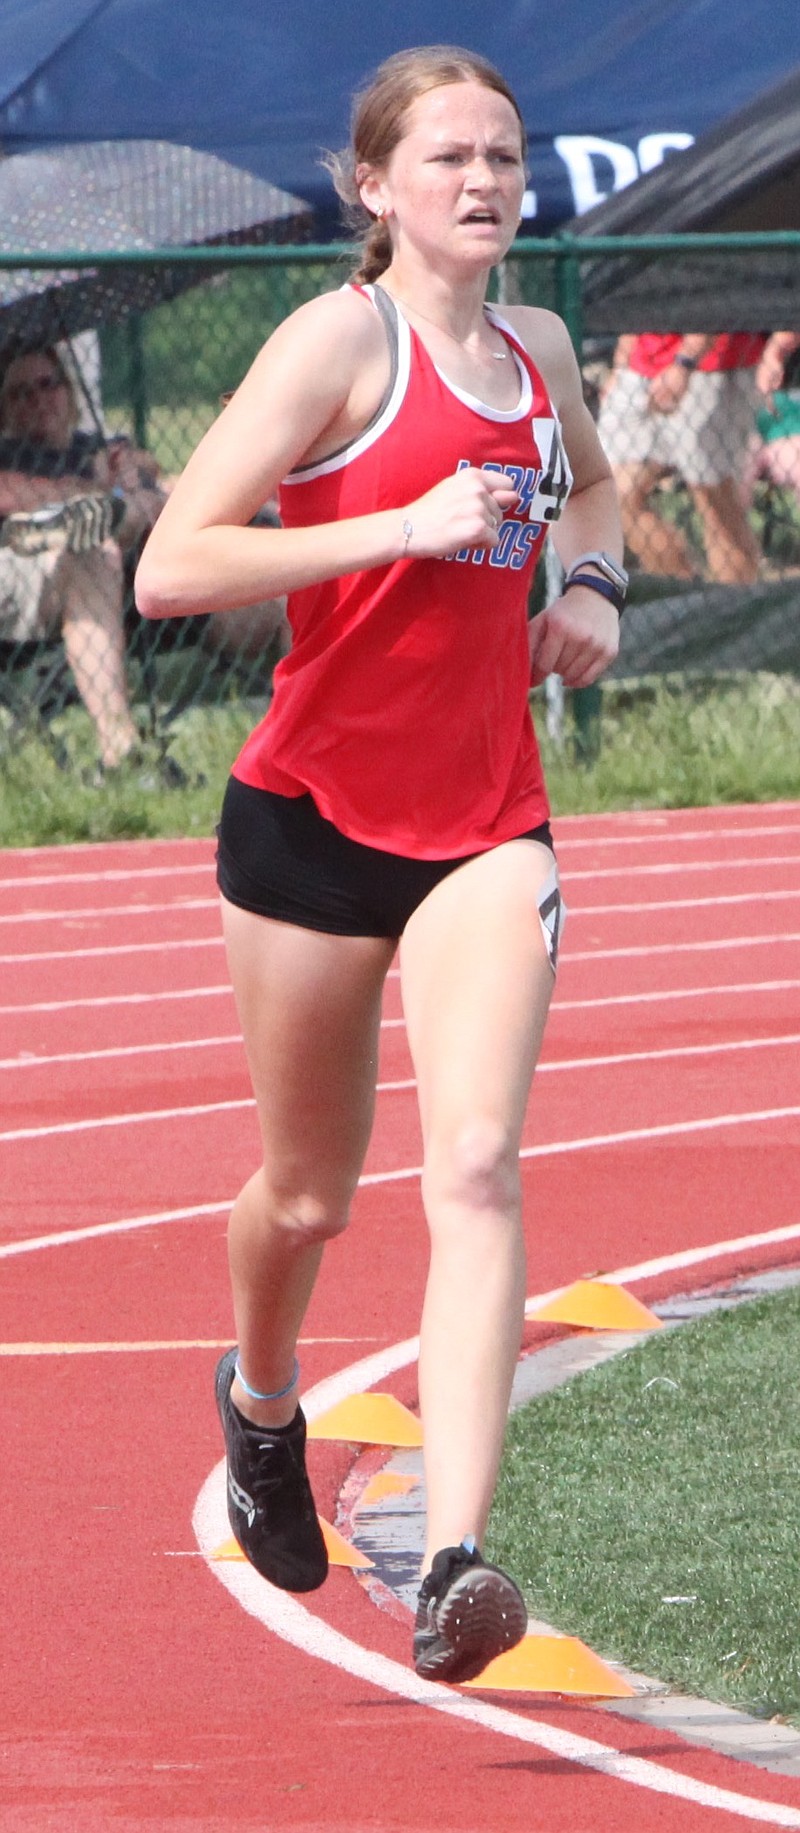 Sophomore Kenzleigh Goans finished thrid place in the girls 800 meter, 1,600, and 3,200 meter relays Saturday. Goans will race in all three events at the Class 3 Sectional 2 Meet on May 20 in Mexico. (Democrat photo/Evan Holmes)